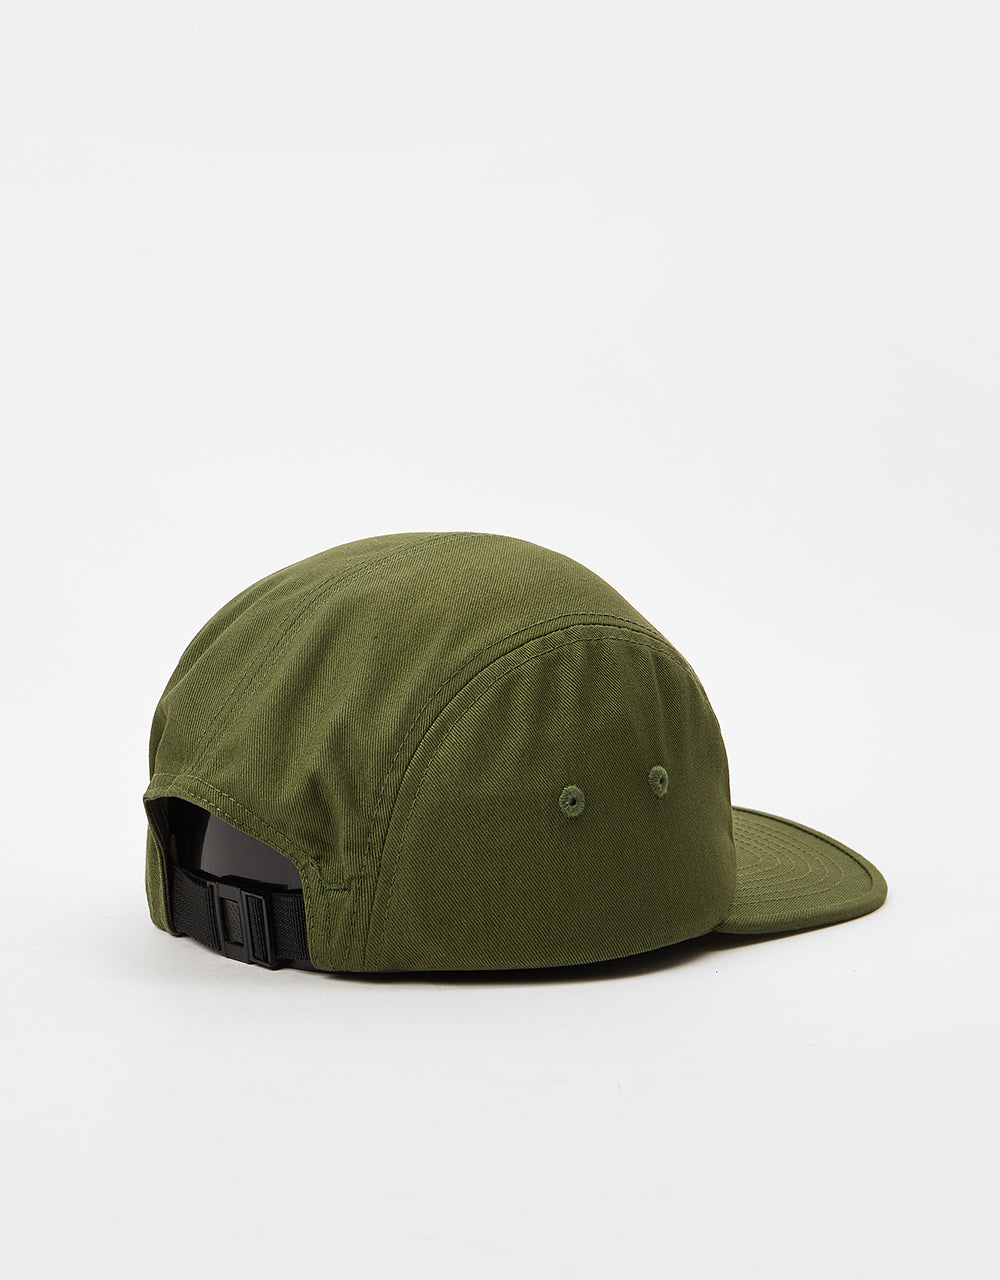 Route One 5 Panel Cap - Cypress